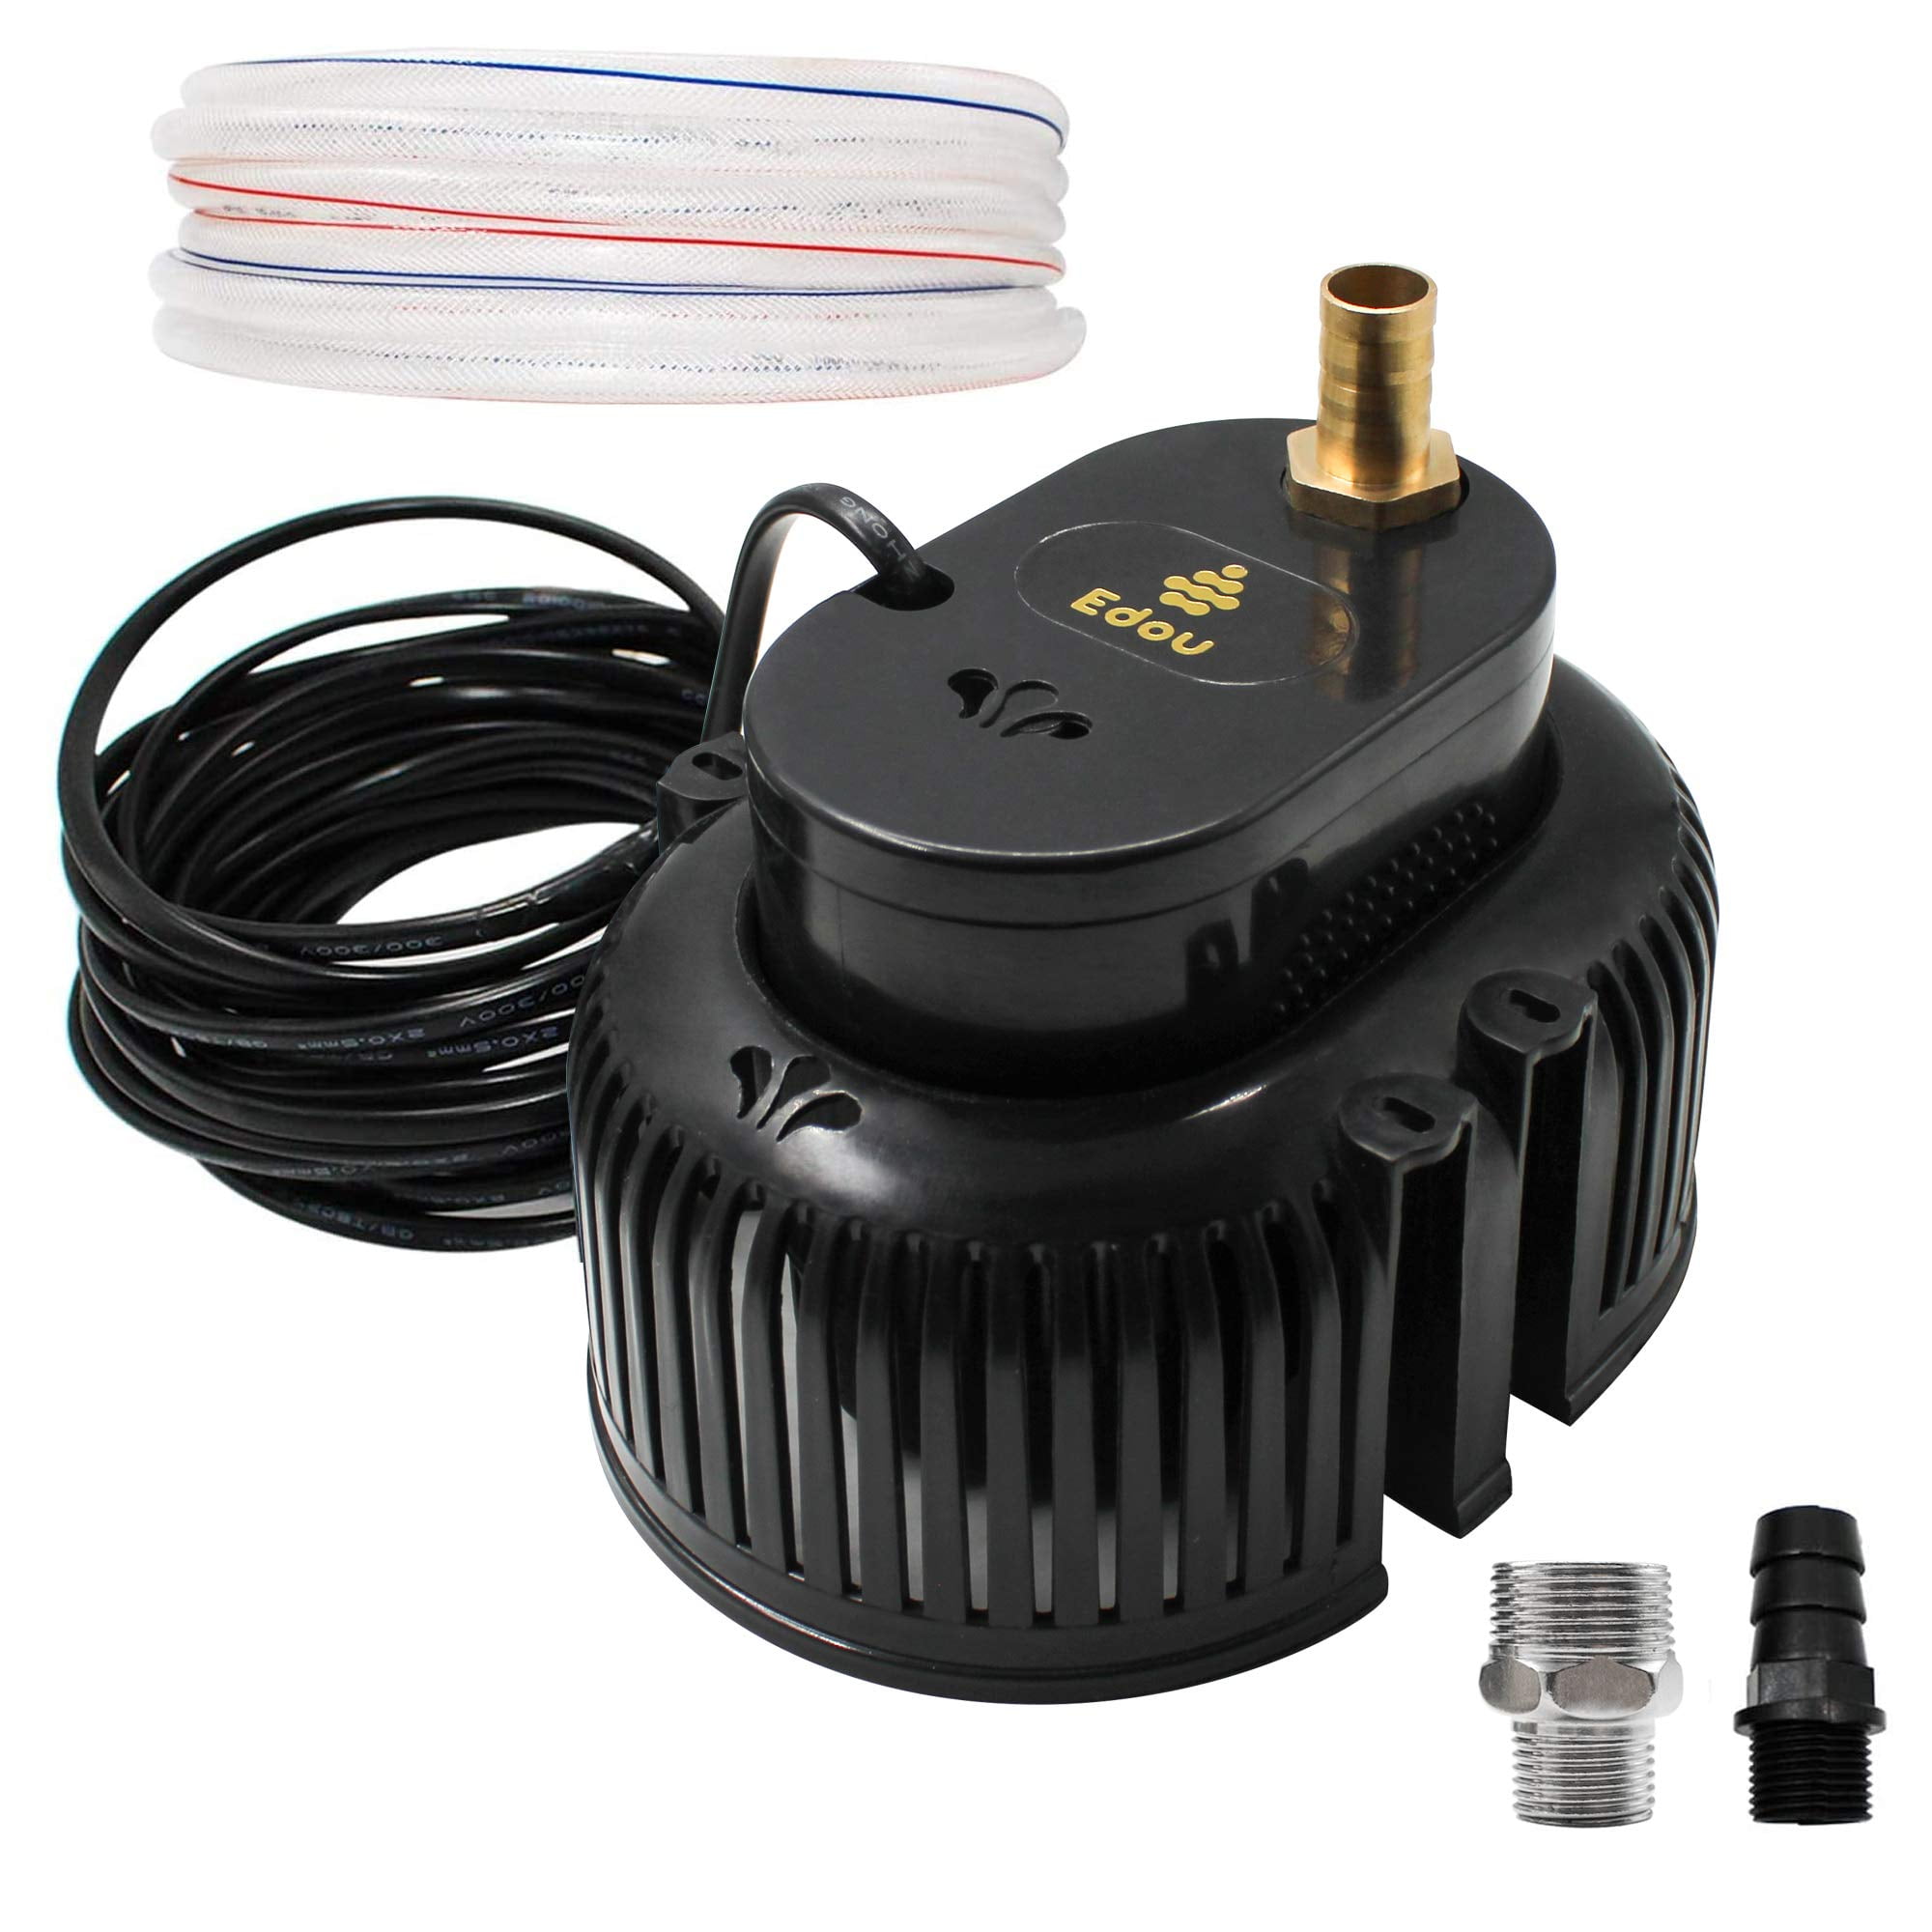 EDOU DIRECT Submersible Pool Cover Pump Black Edition Heavy Duty 850 GPH  Max Flow 75W Includes 16' Hose  Adapters Ideal for Above Ground   Inground Pools.